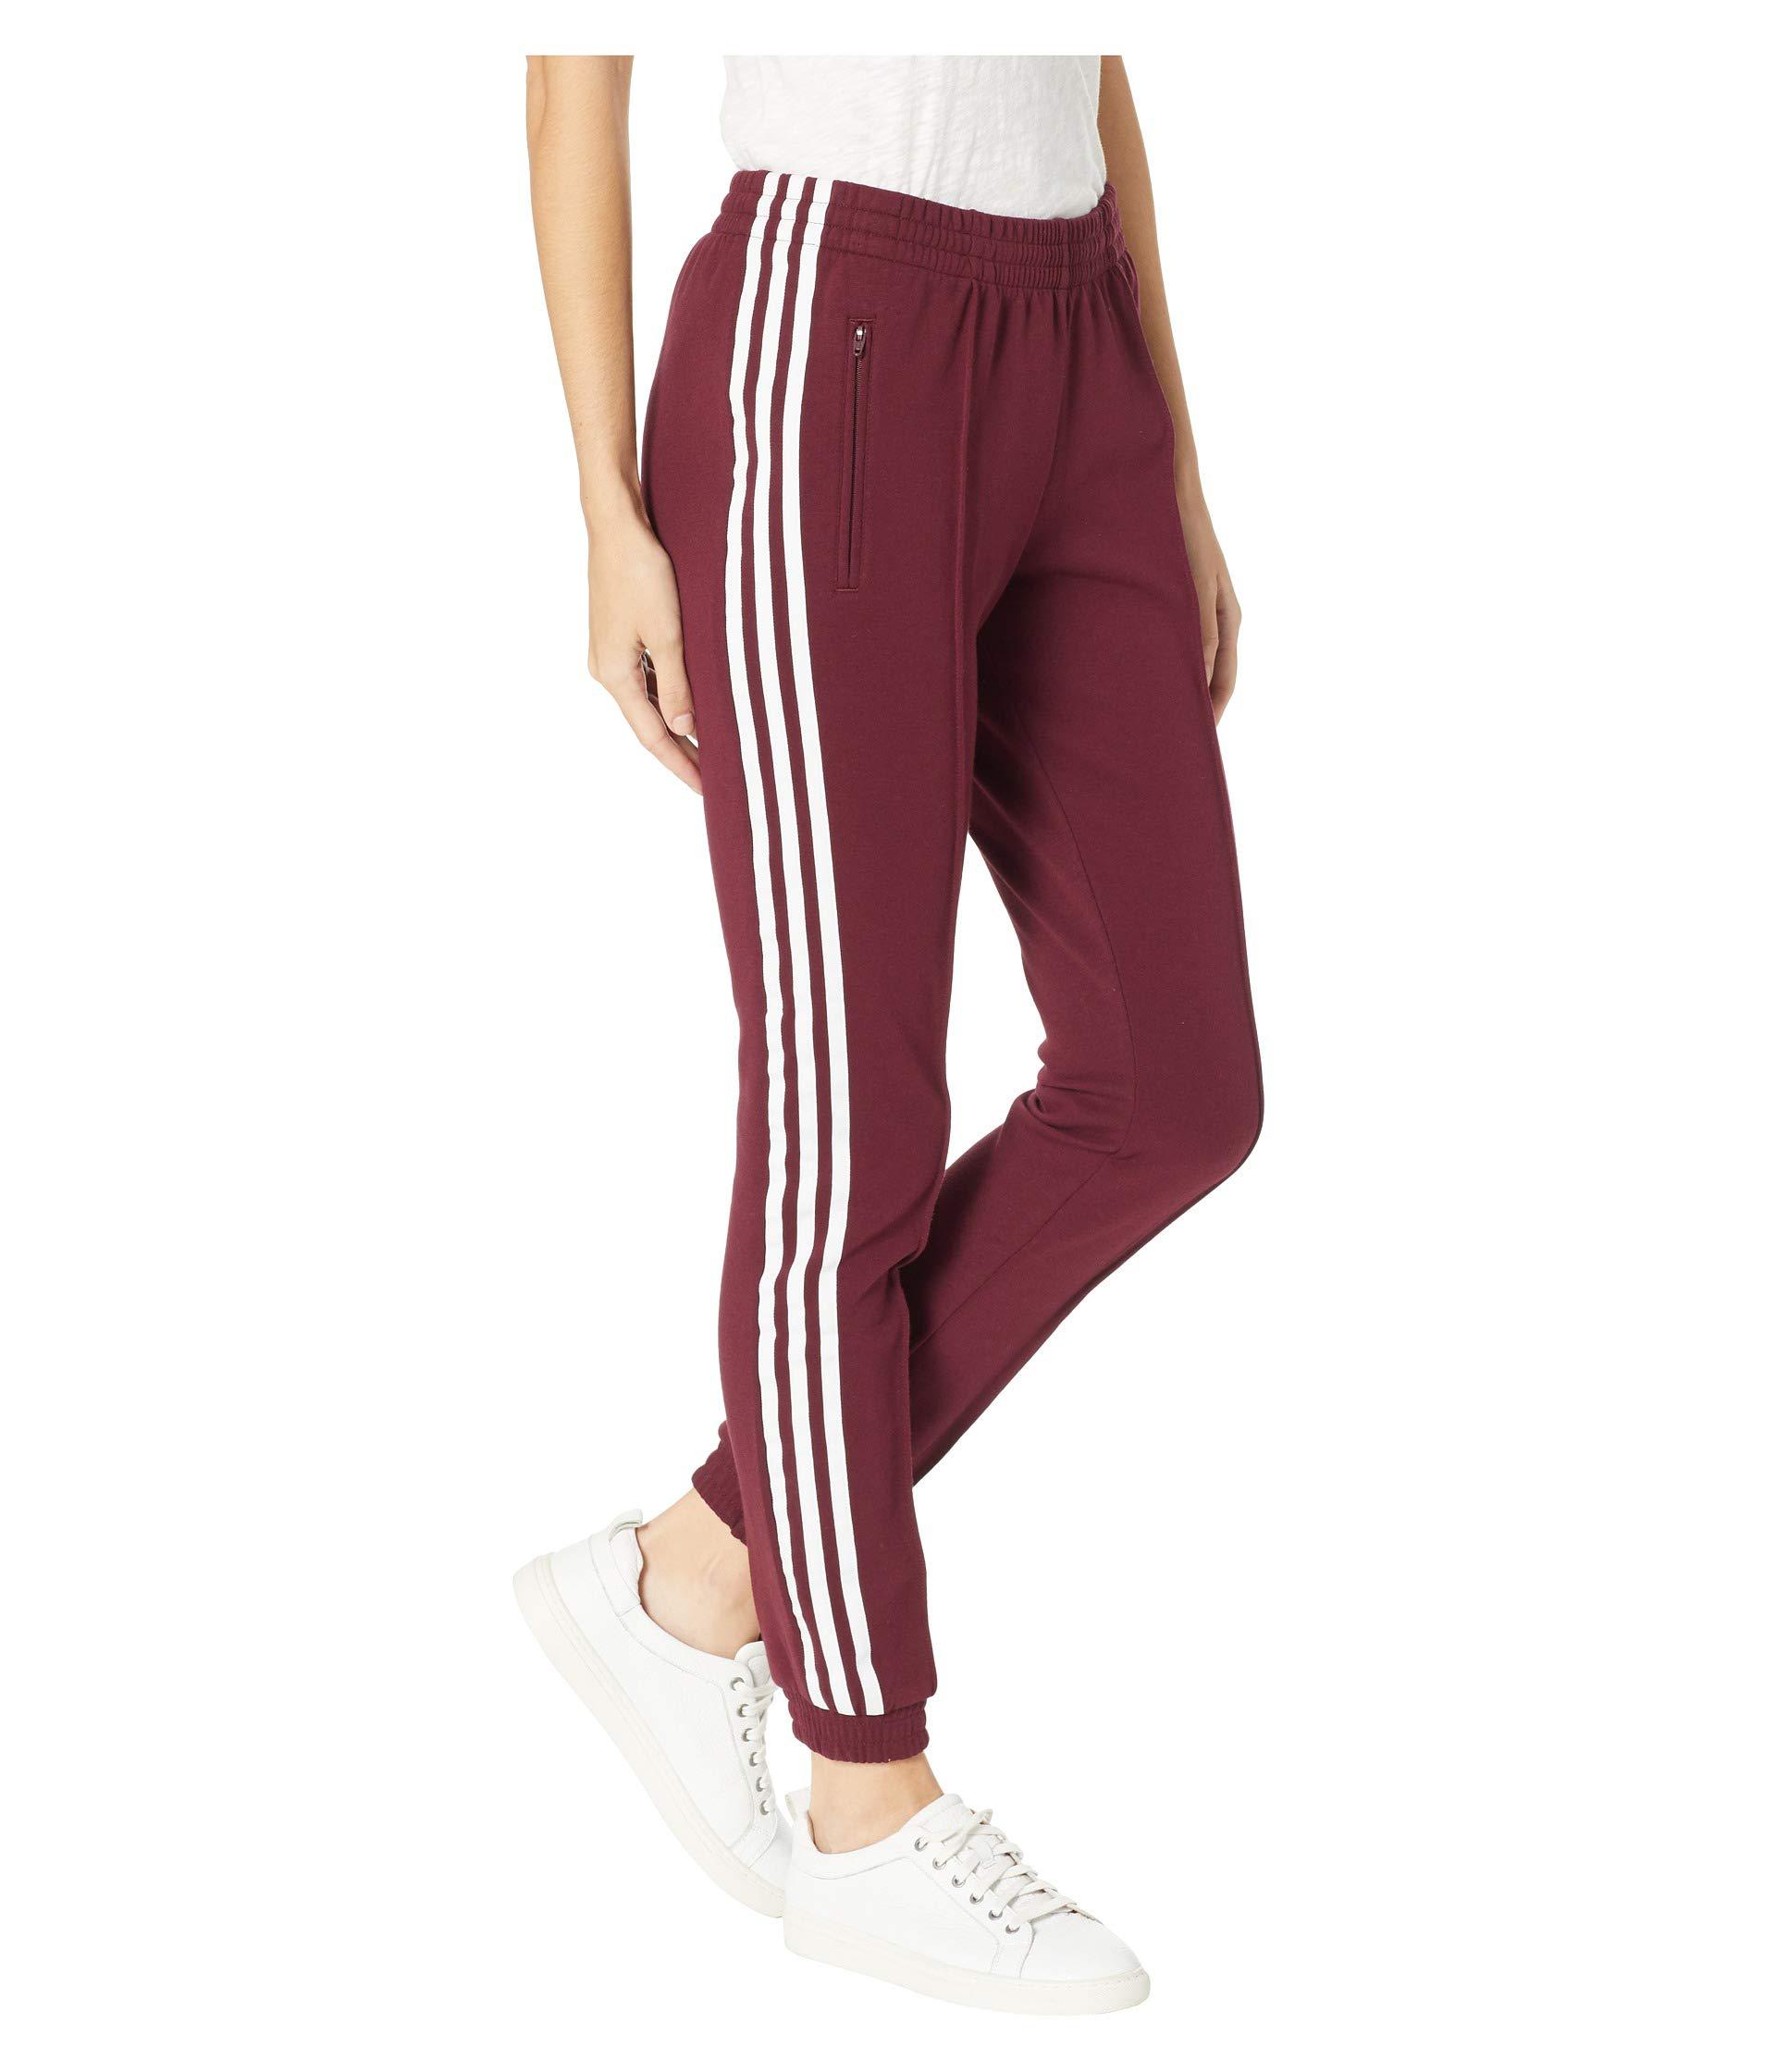 adidas clrdo track pants Shop Clothing & Shoes Online